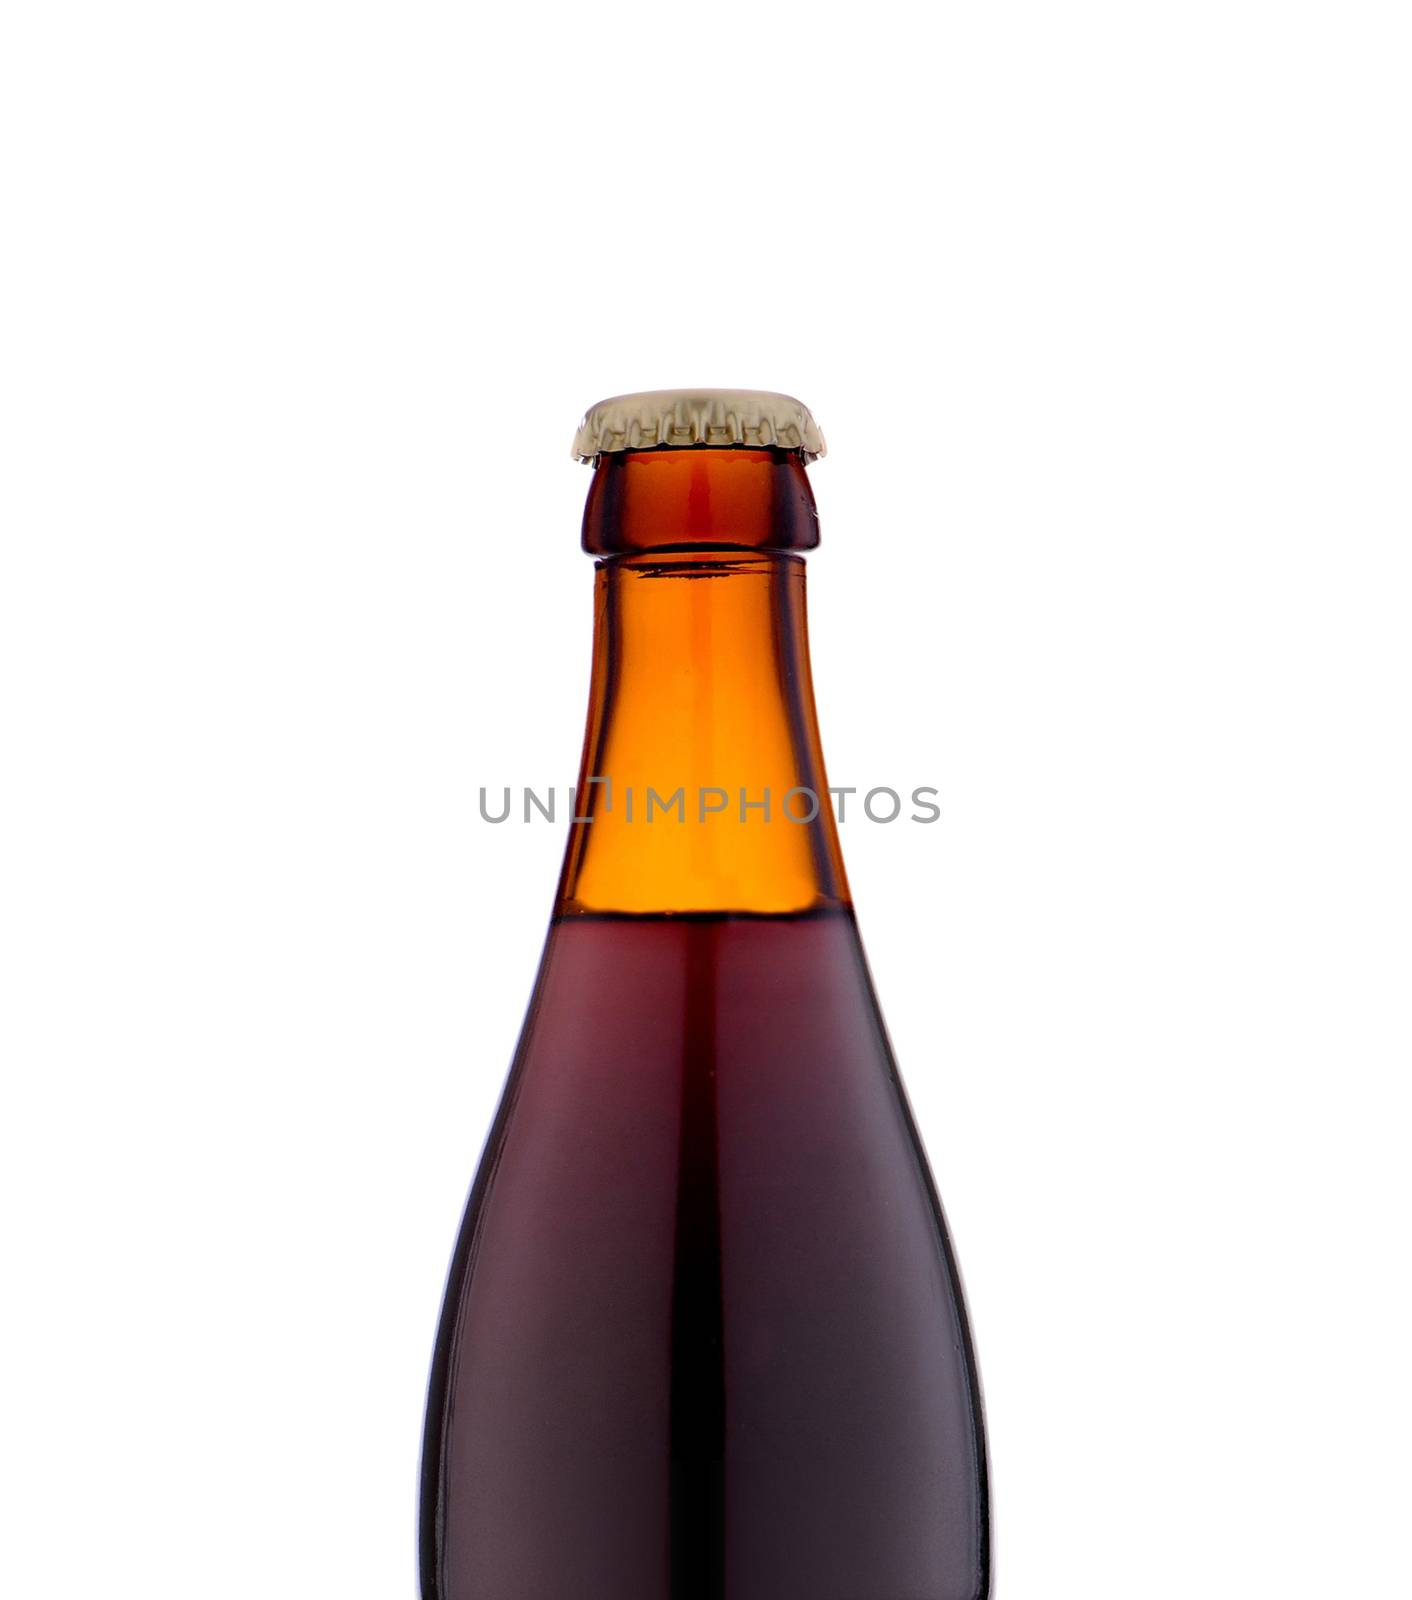 Bottle of beer close up on white background.